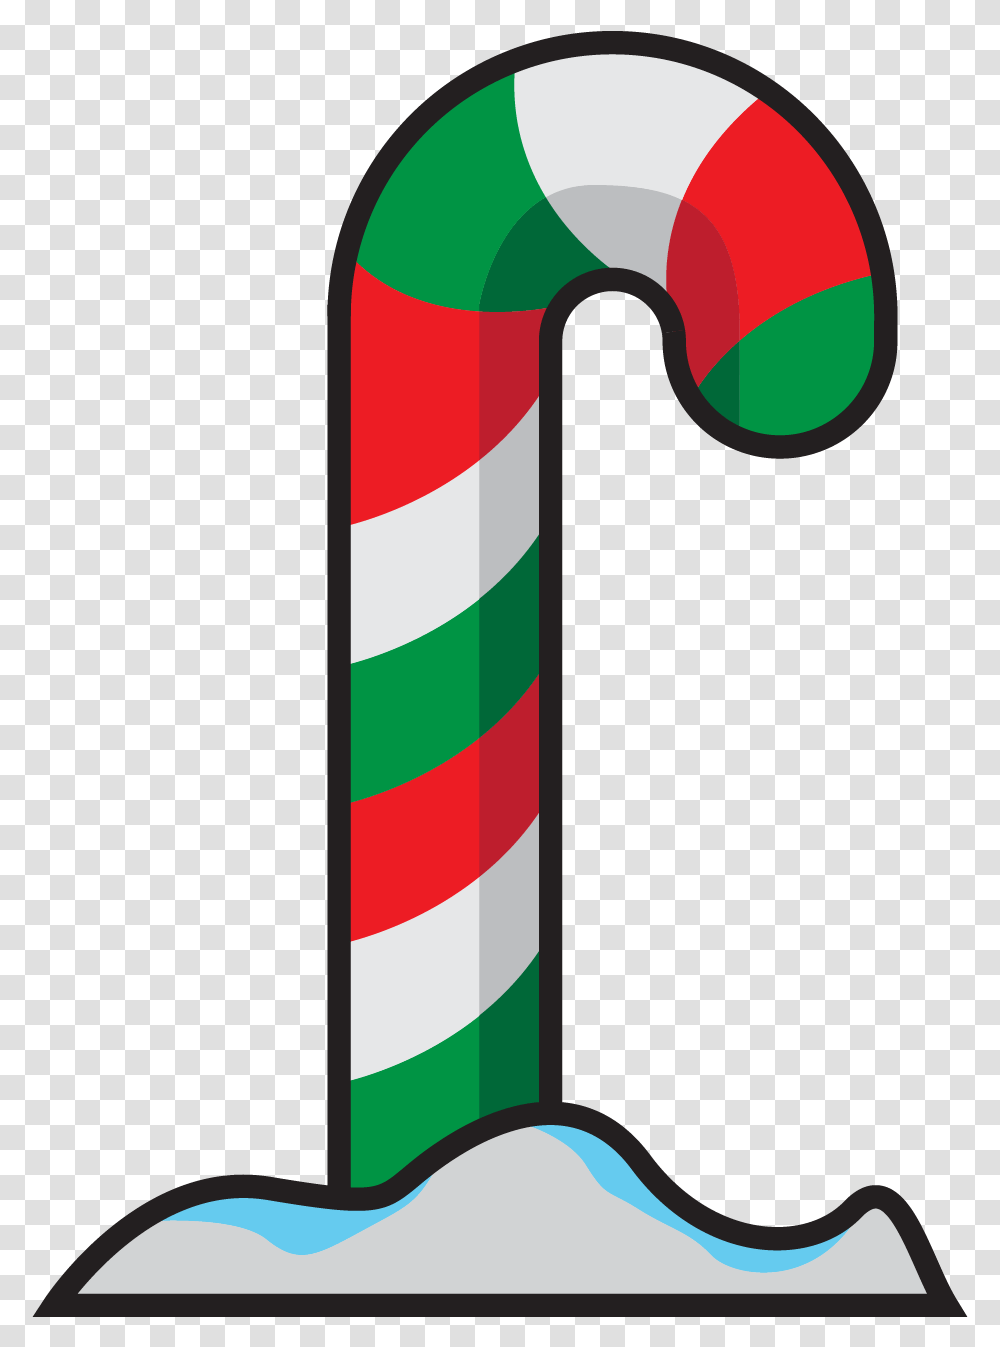 Candy Cane In Christmas Icon With Snow Candy Cane, Stick Transparent Png